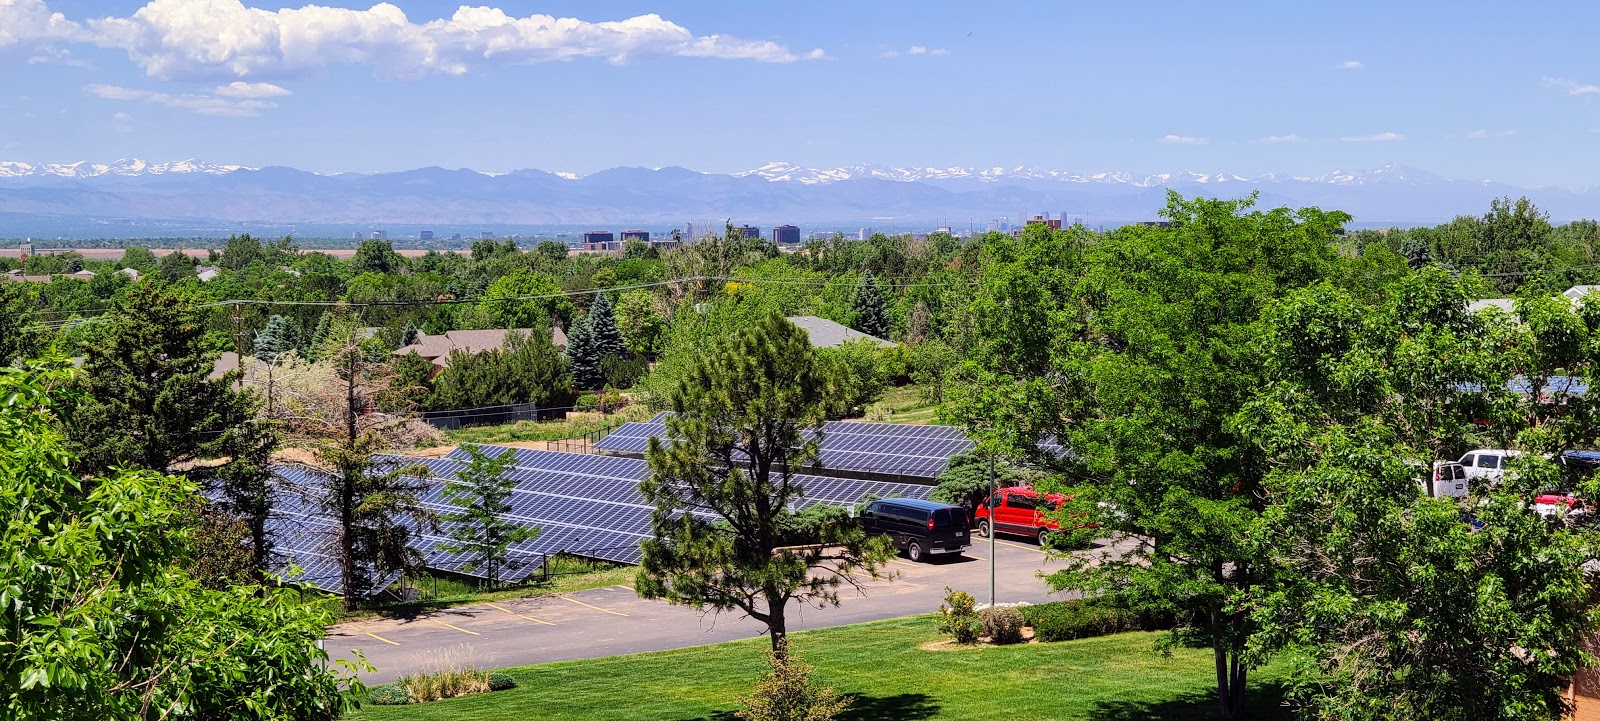 A view of the Oxford Vista solar field with a backdrop of the Colorado mountain range.